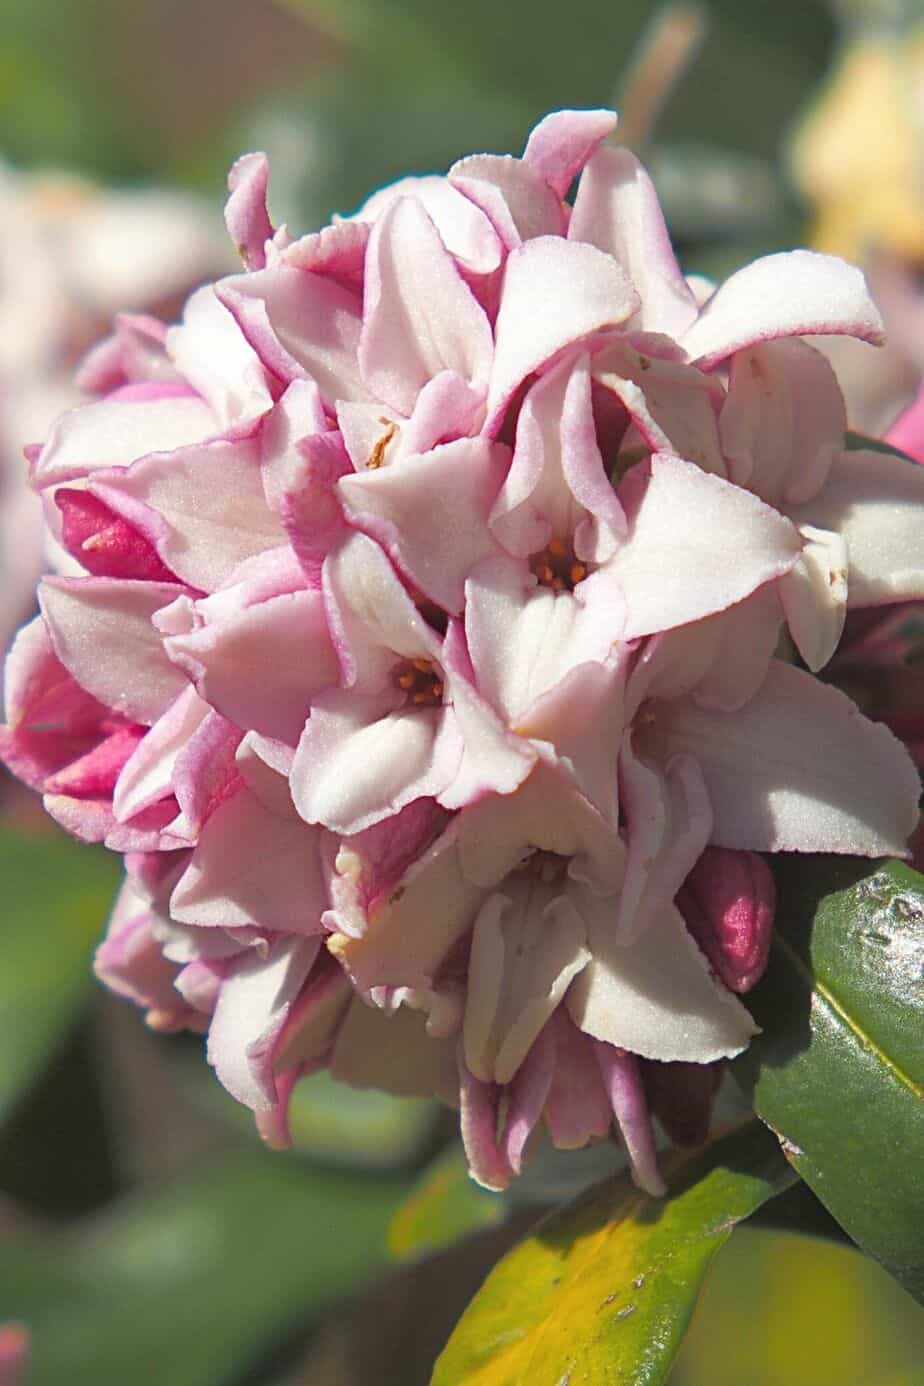 Winter Daphne has white-pink flowers that adds a pastel hue to your colorful southeast facing garden